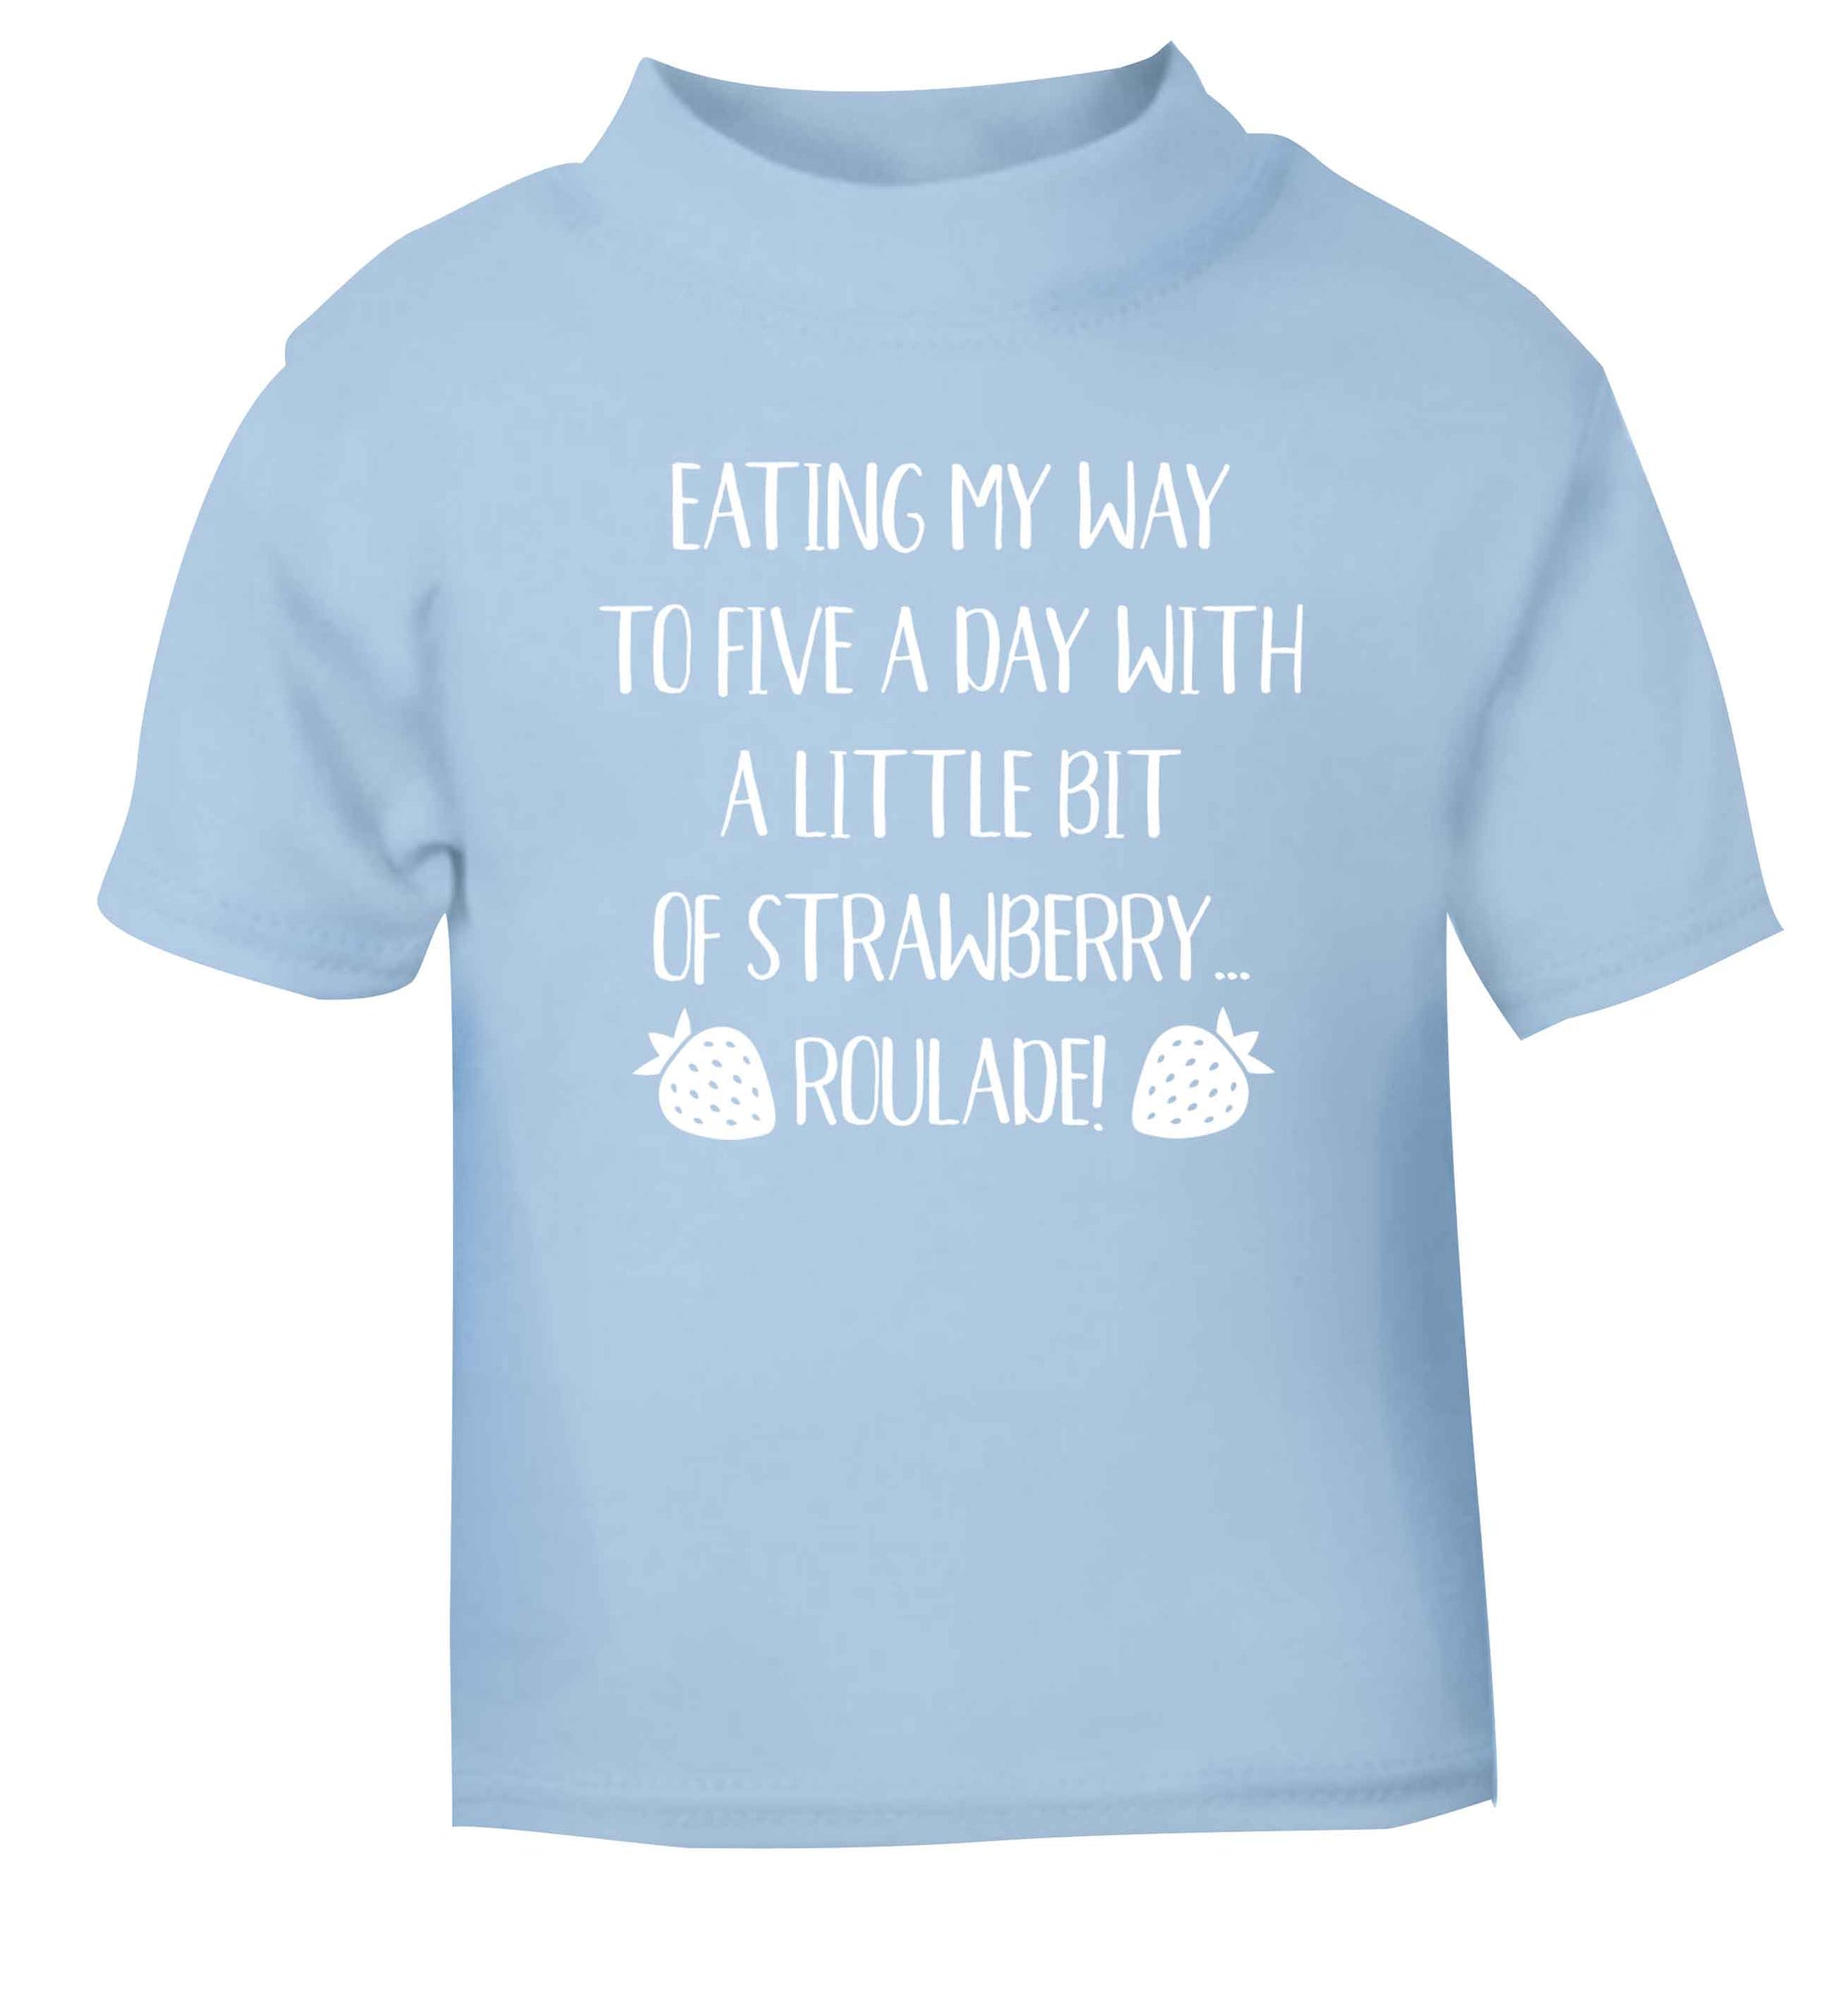 Eating my way to five a day with a little bit of strawberry roulade light blue Baby Toddler Tshirt 2 Years